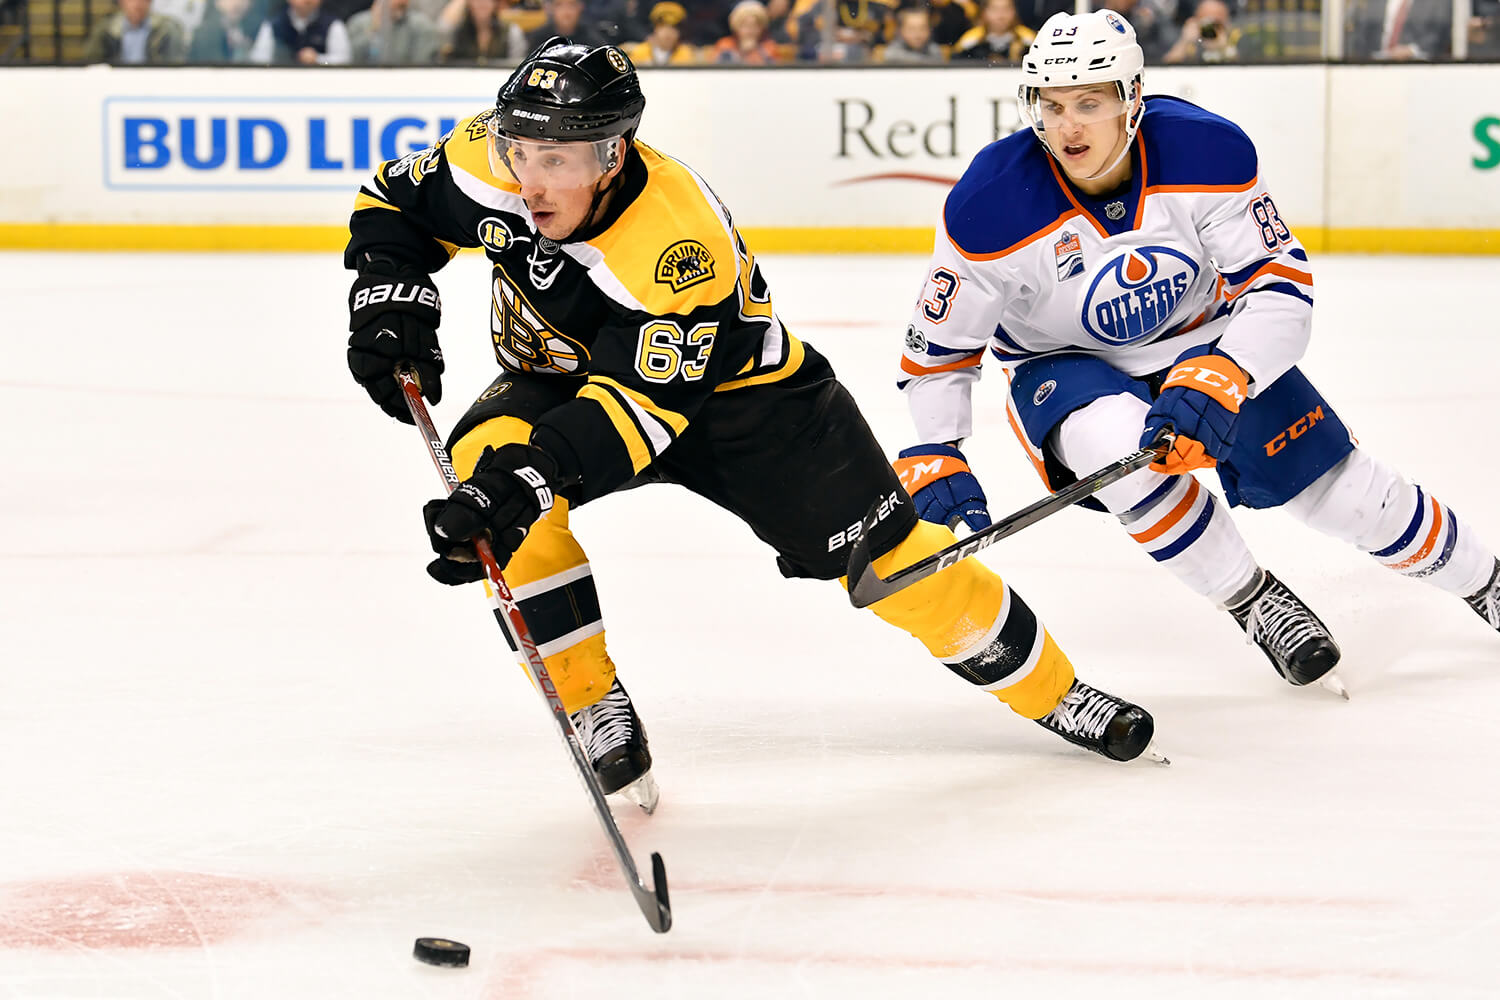 Bruins Stumble in Anticipated Showdown with Oilers